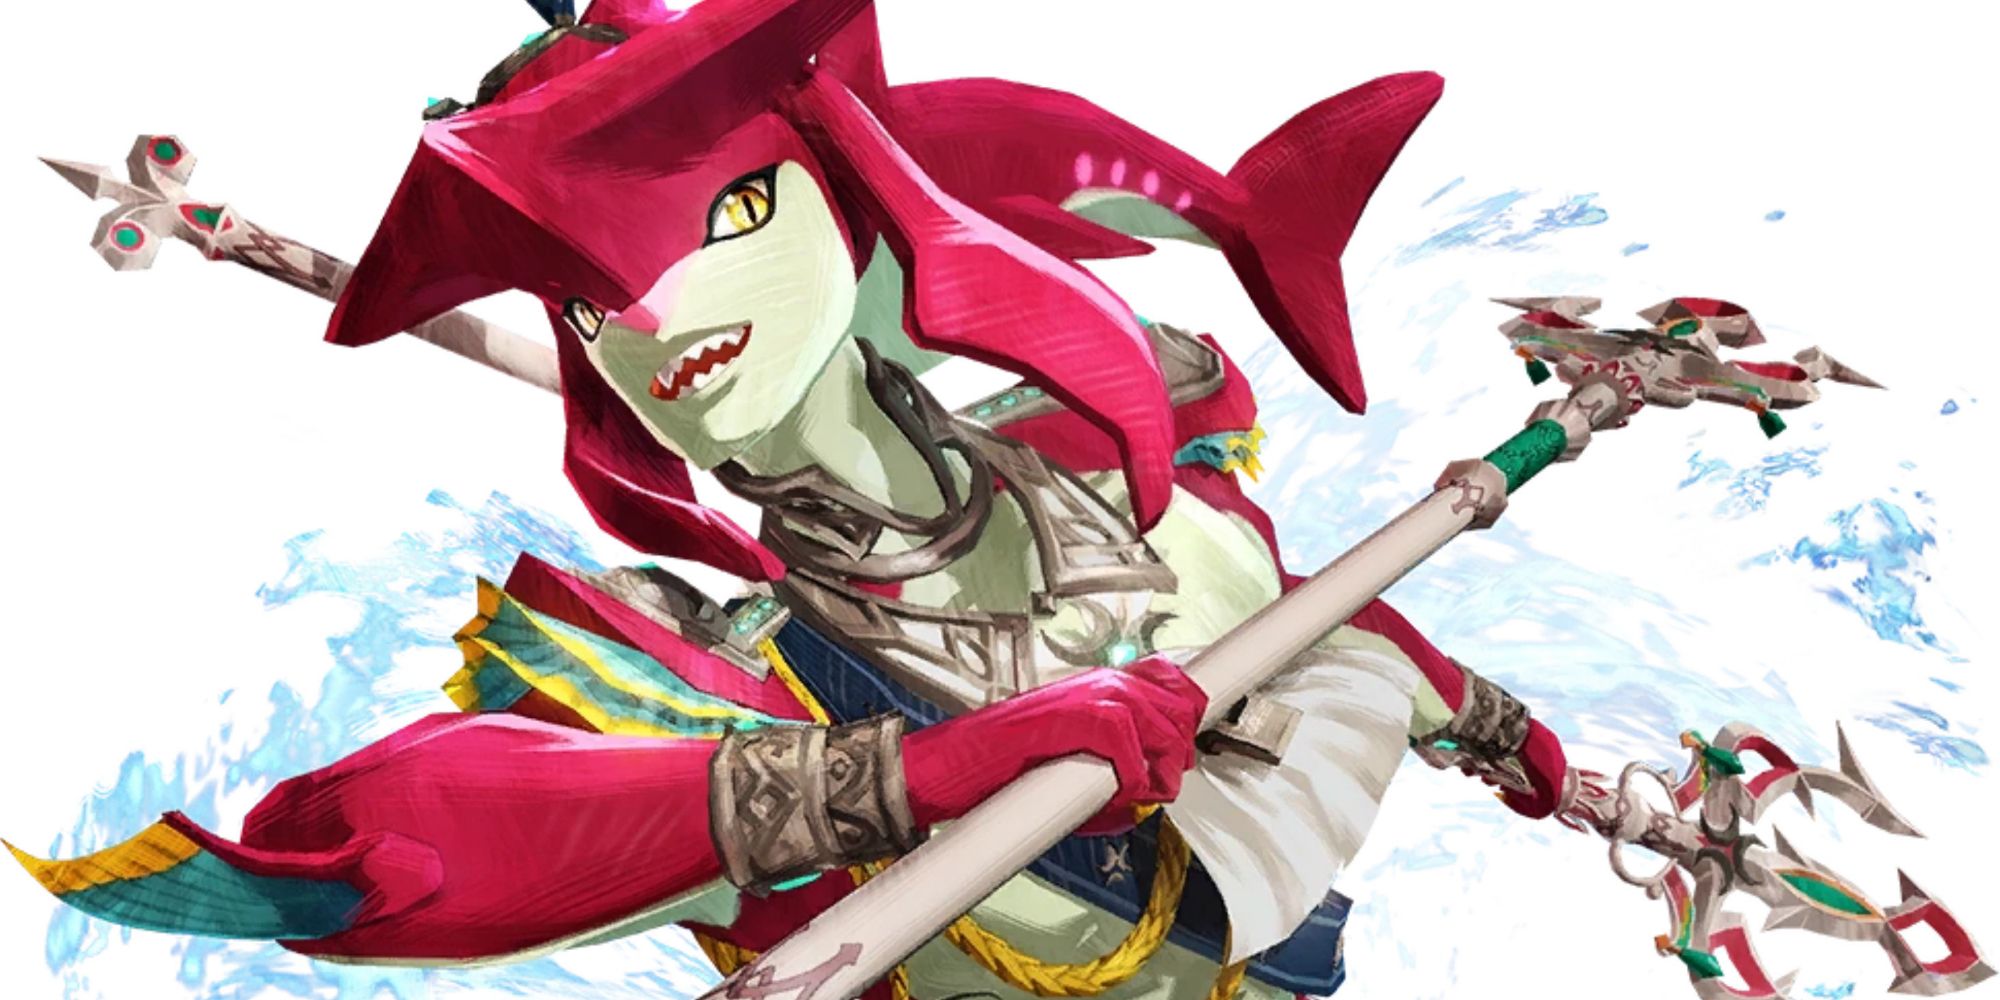 Red Zora prince, younger brother of Zora Champion Princess Mipha